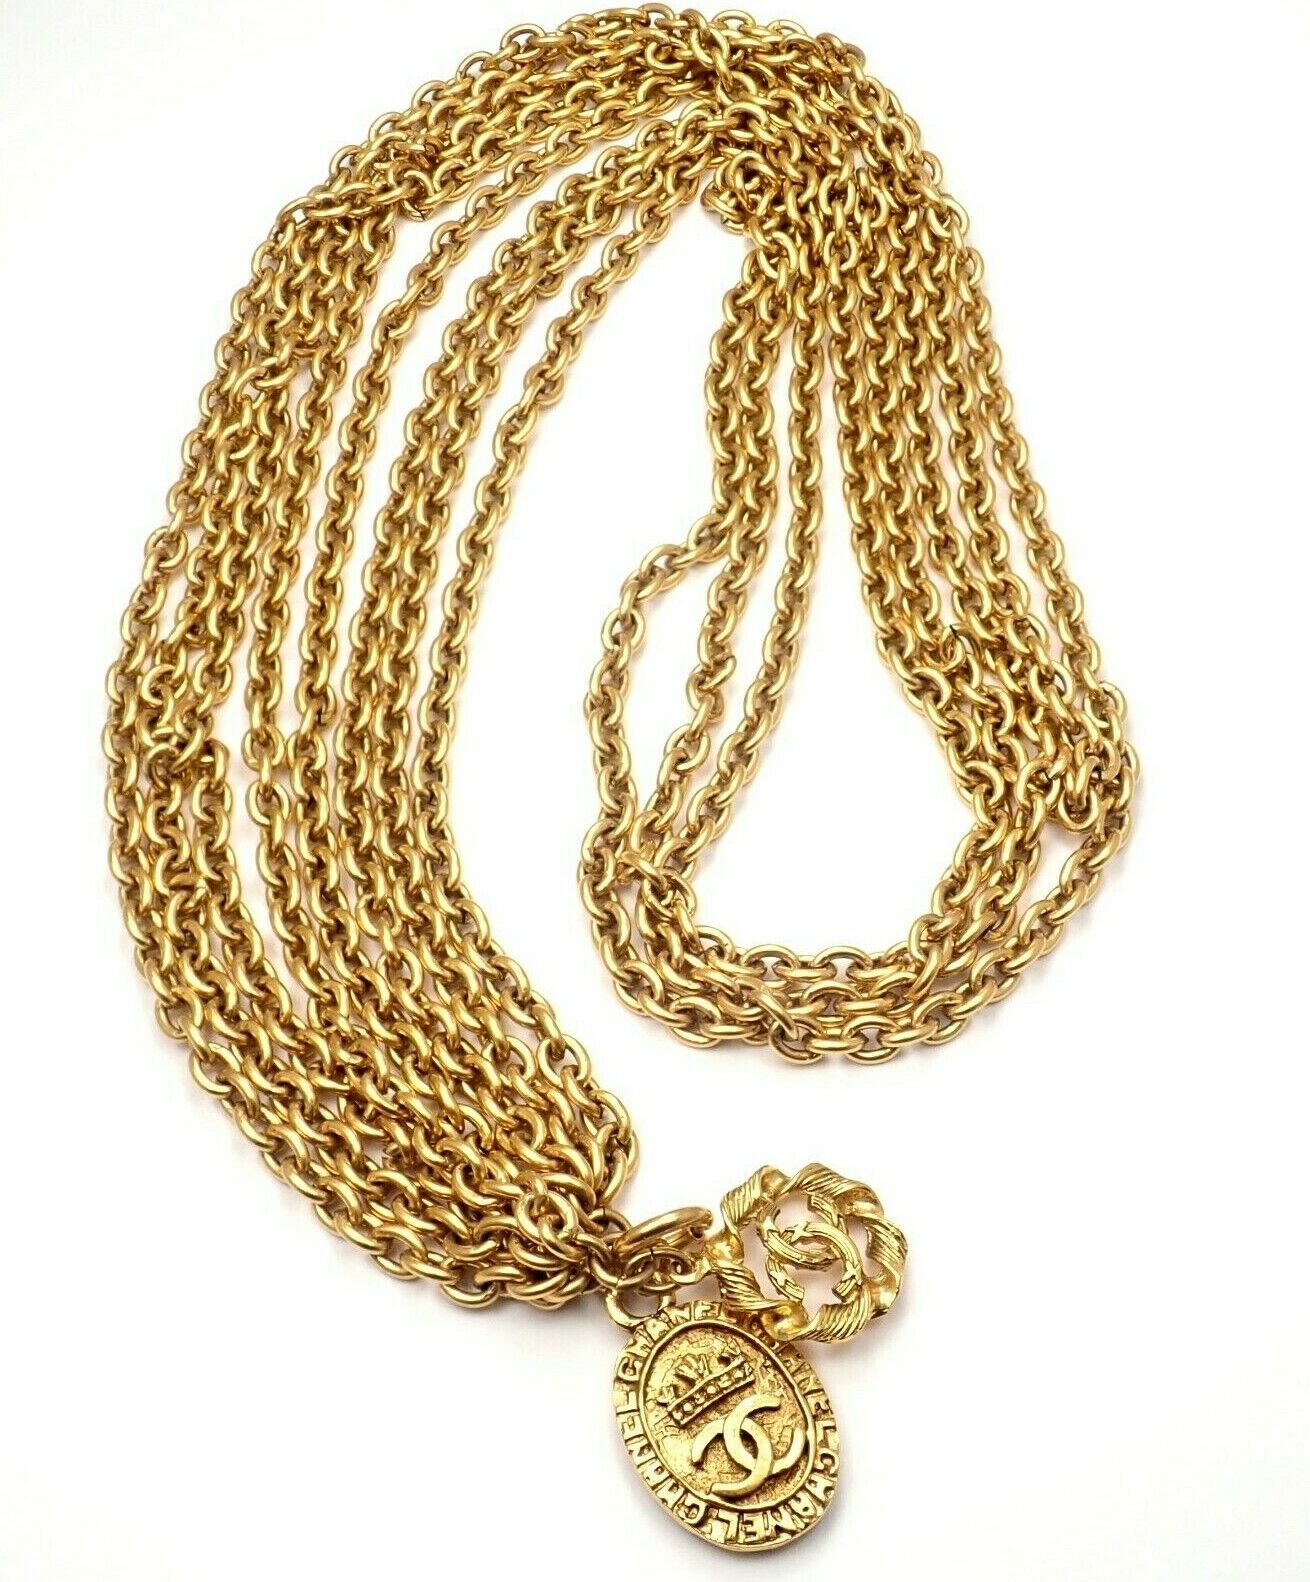 Chanel 3 Row Draped Clasp Belt Necklace